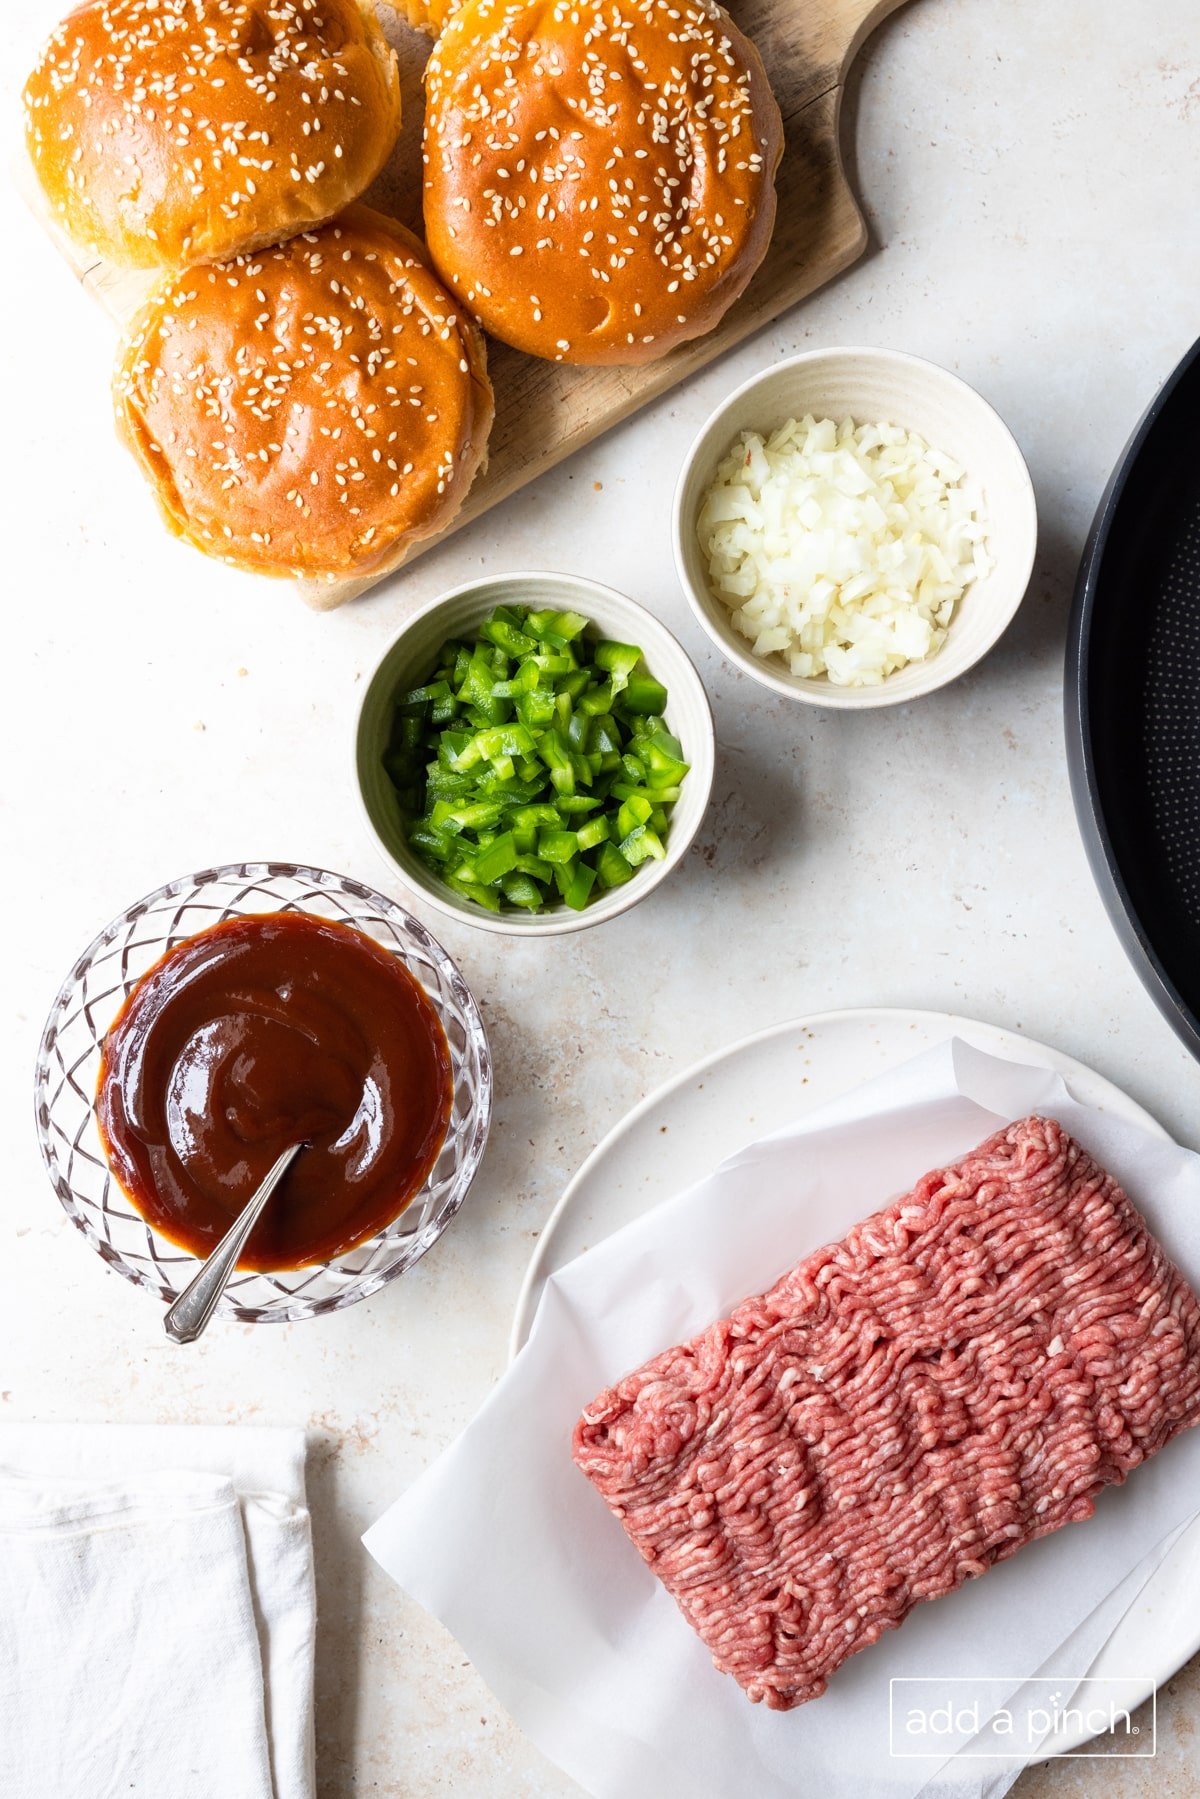 Photo of ground beef, onion, green pepper, bbq sauce, and buns on a white background.